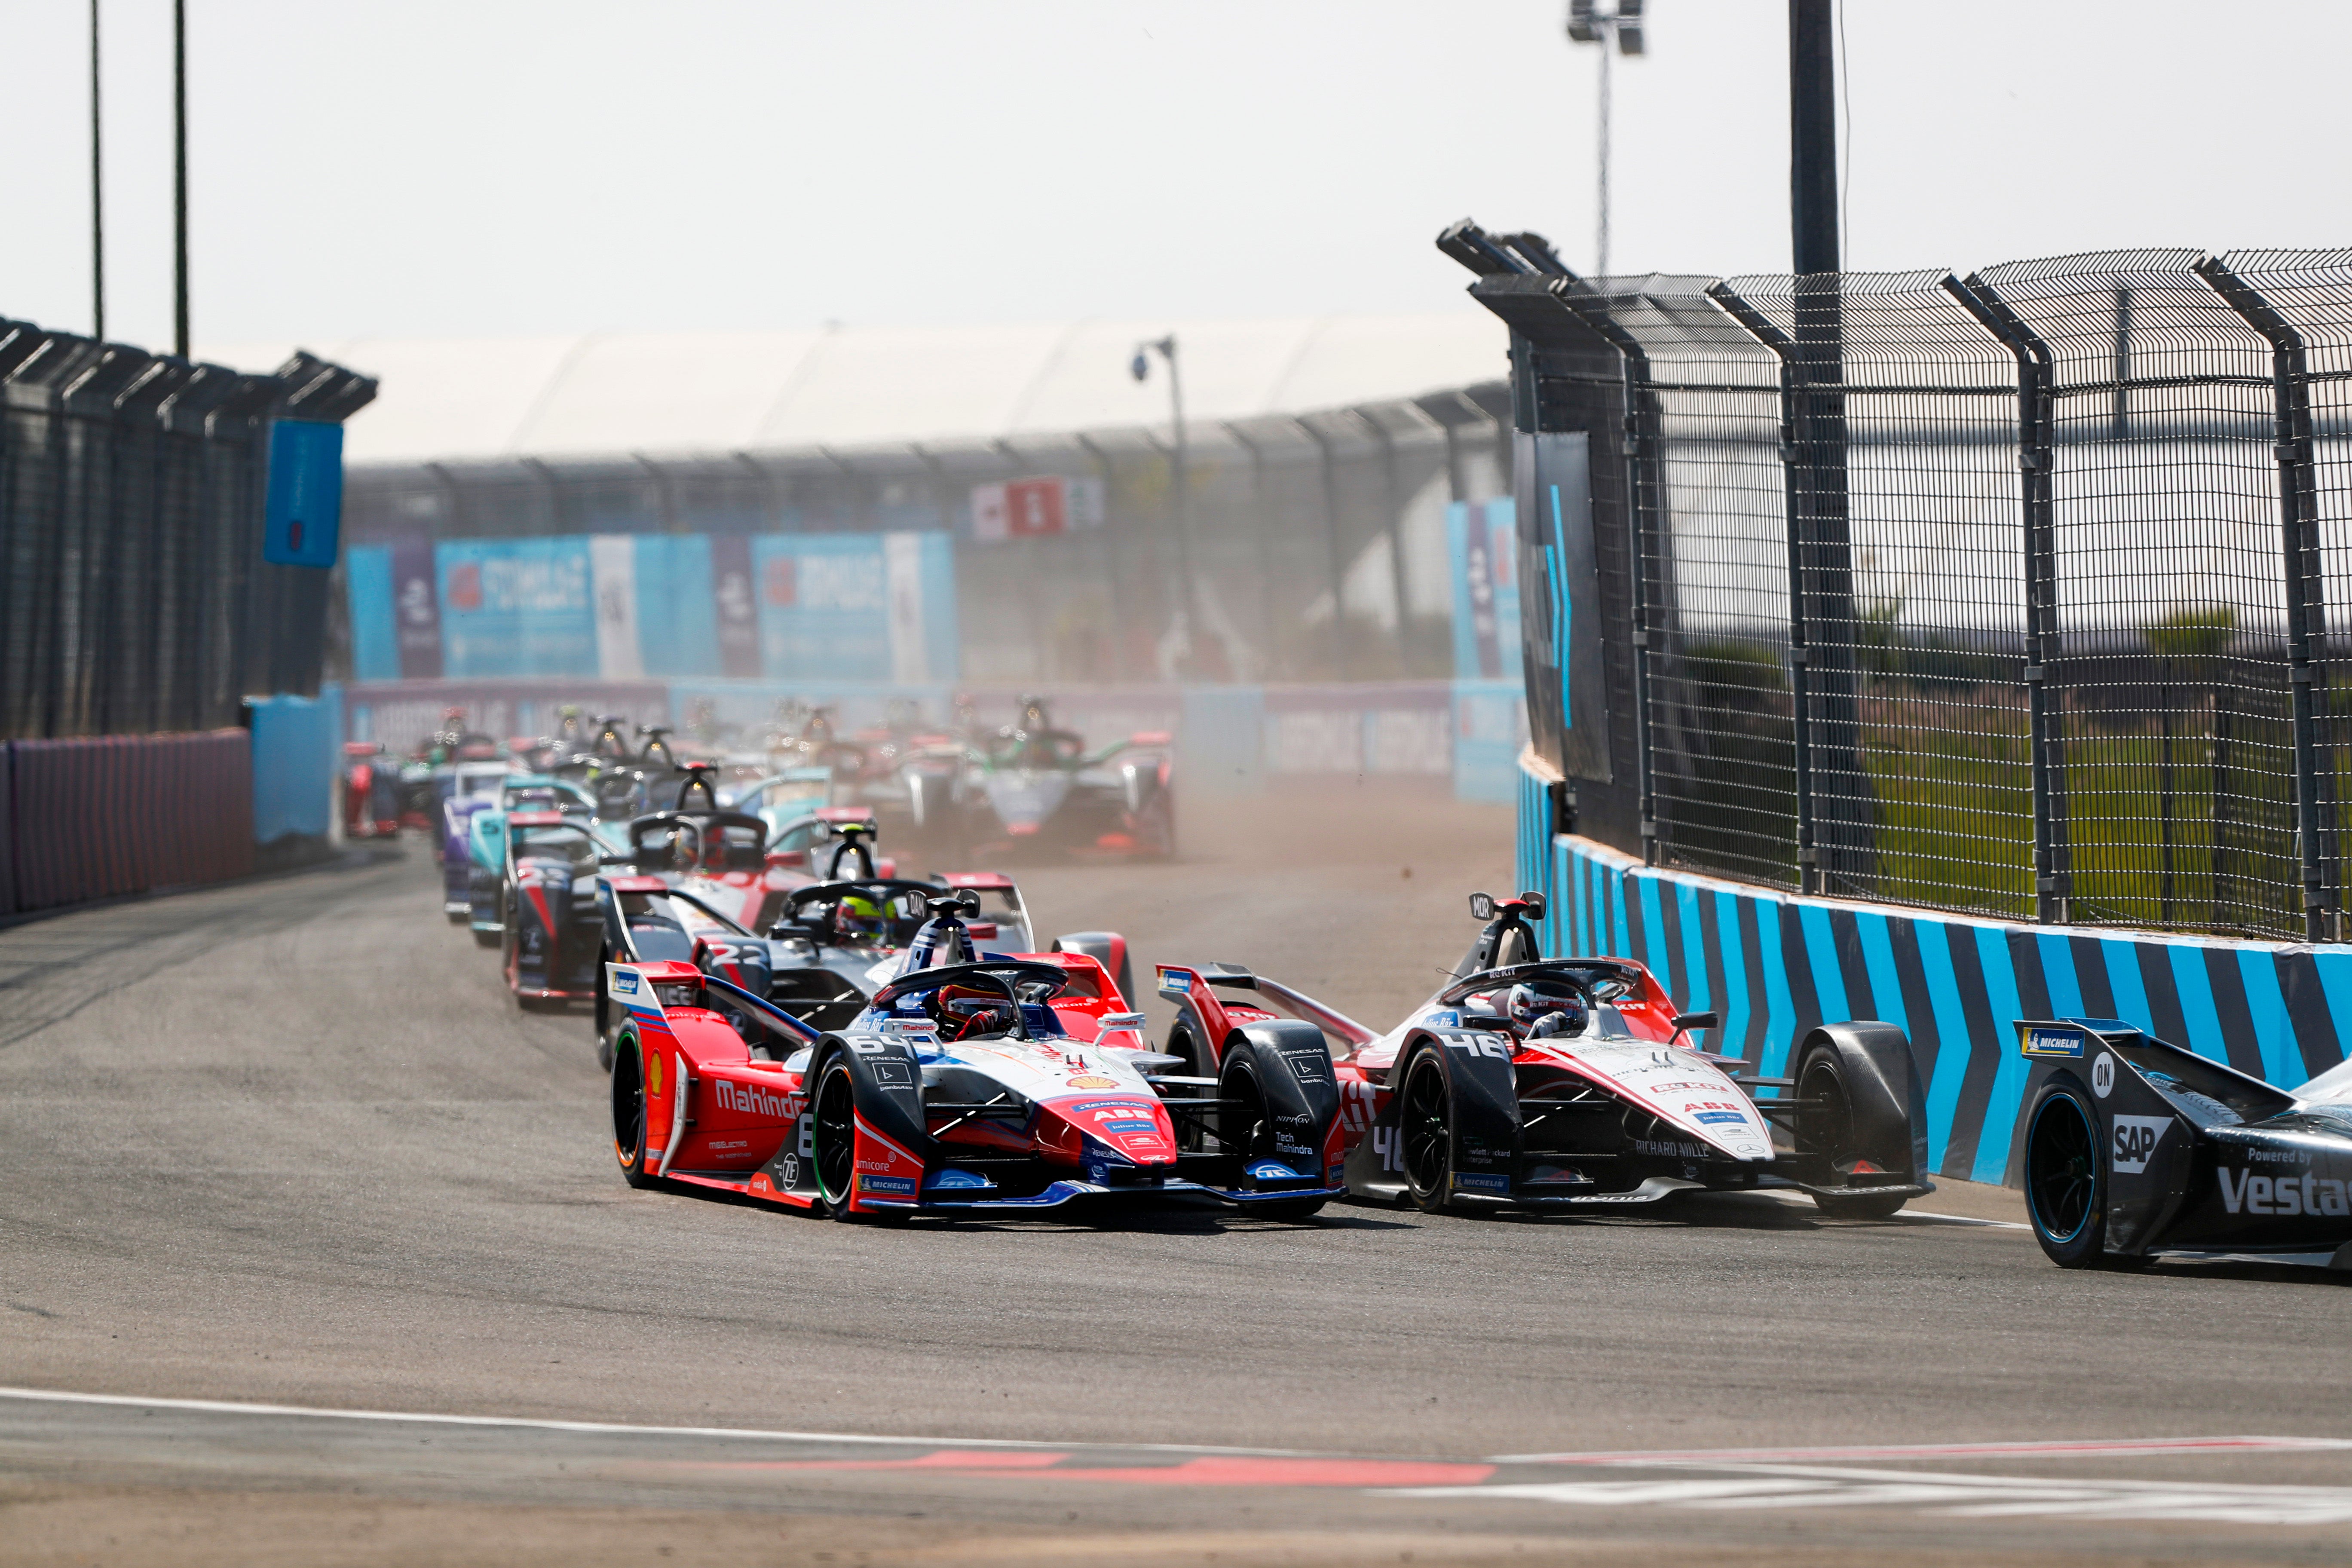 The 2020 Marrakesh E-Prix in Morocco was a replacement for a planned Hong Kong event